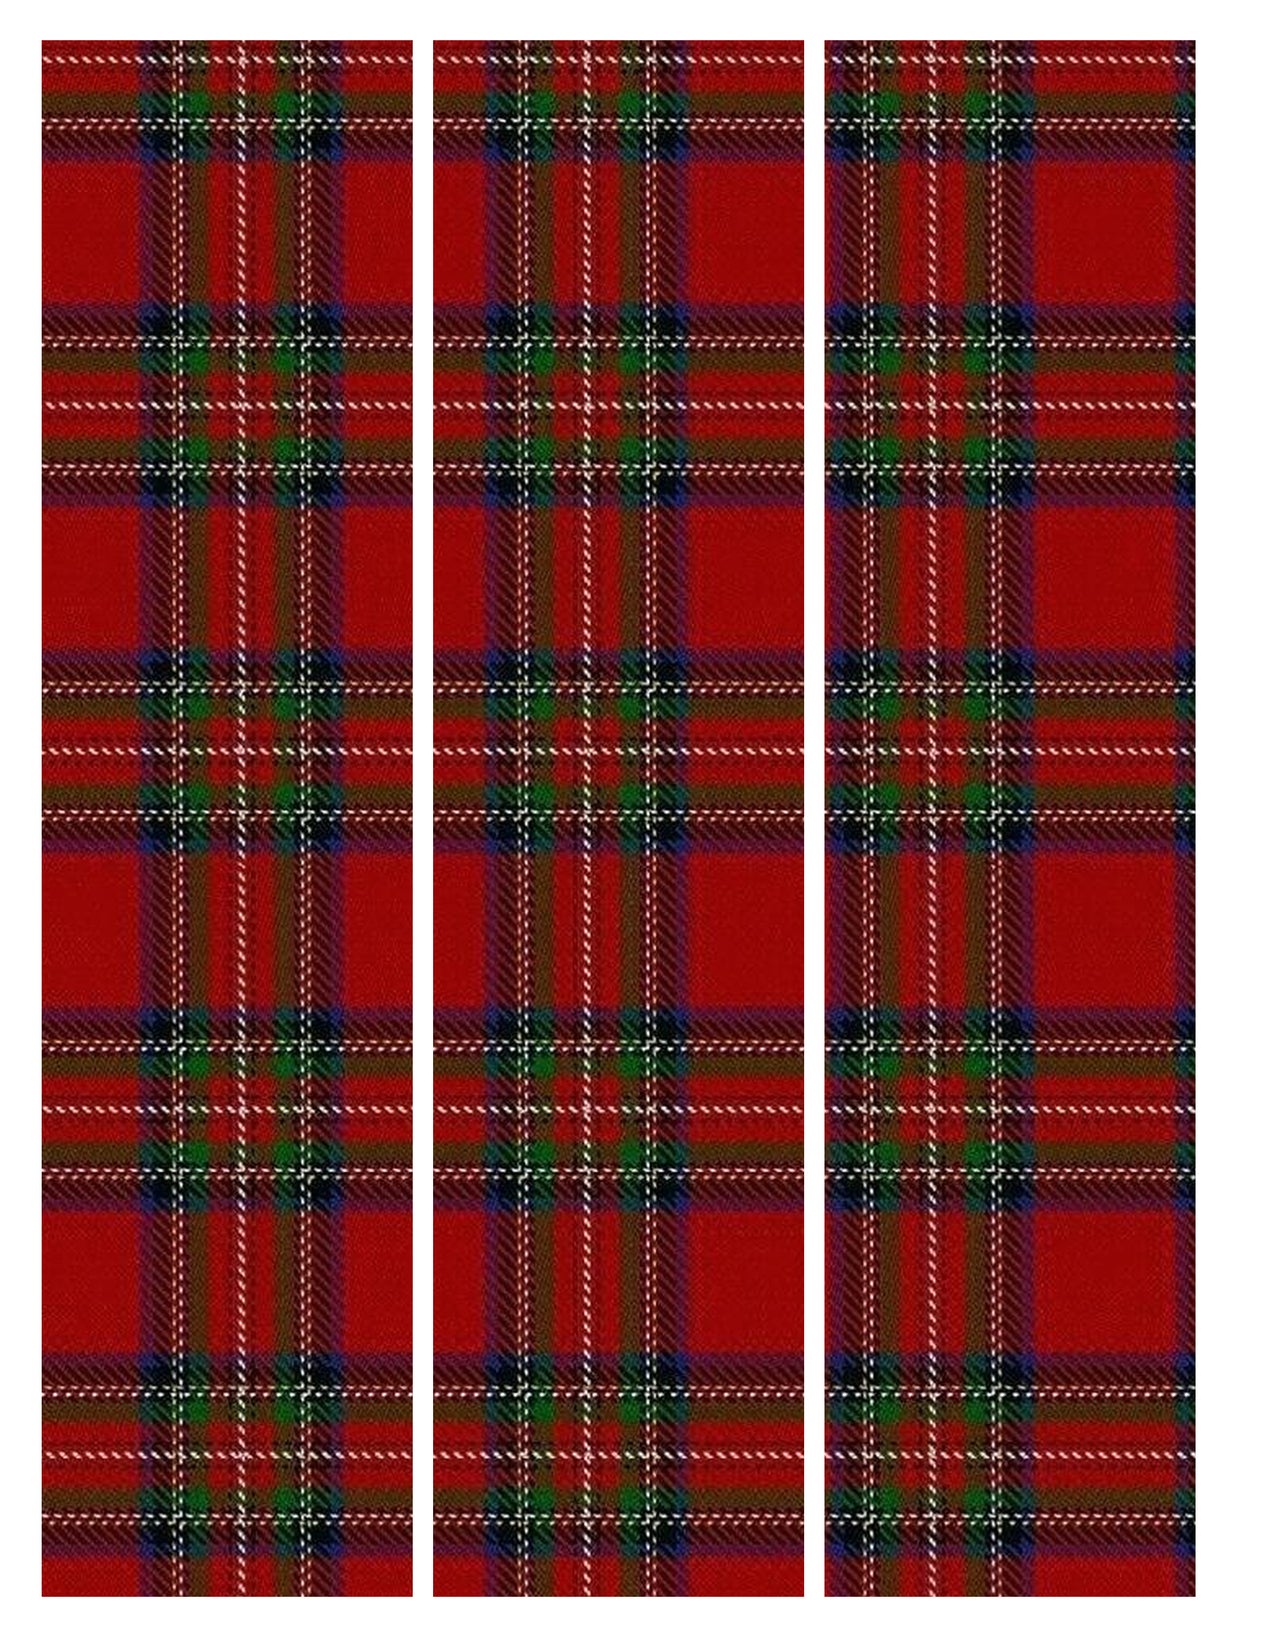 Red Blue Green Plaid Stripes Pattern Edible Cake Topper Image Strips ABPID14806